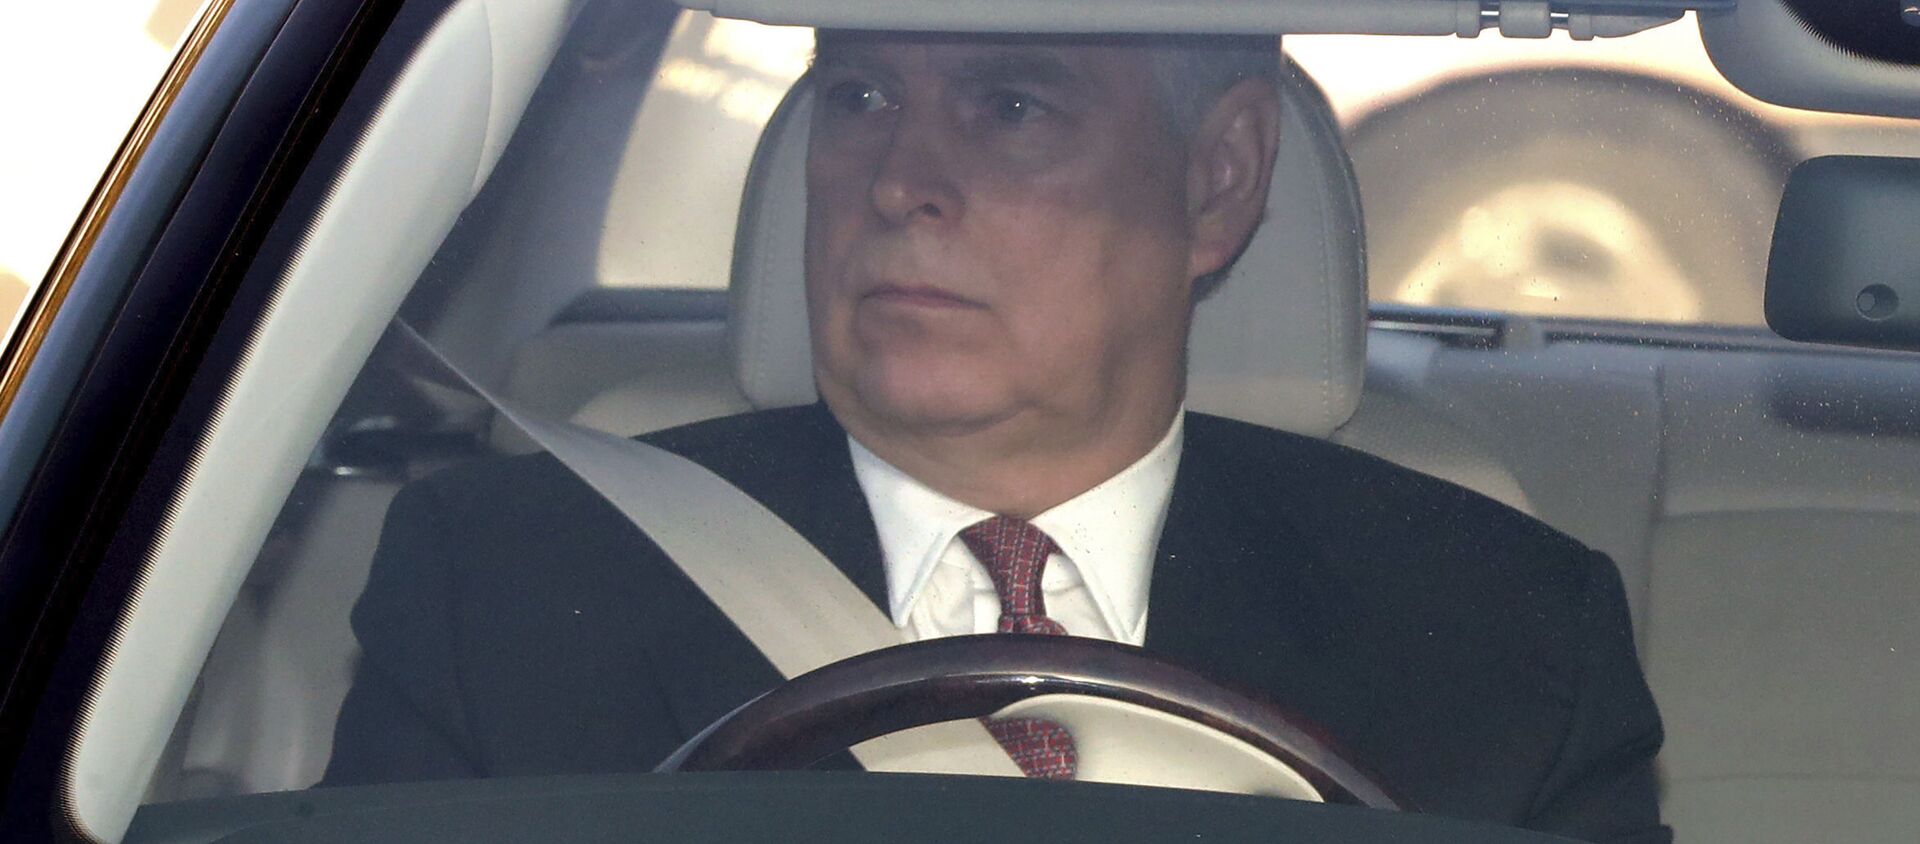 Britain's Prince Andrew drives into Buckingham Palace, as he arrives for the traditional Queen's Christmas lunch, in London - Sputnik International, 1920, 19.08.2021